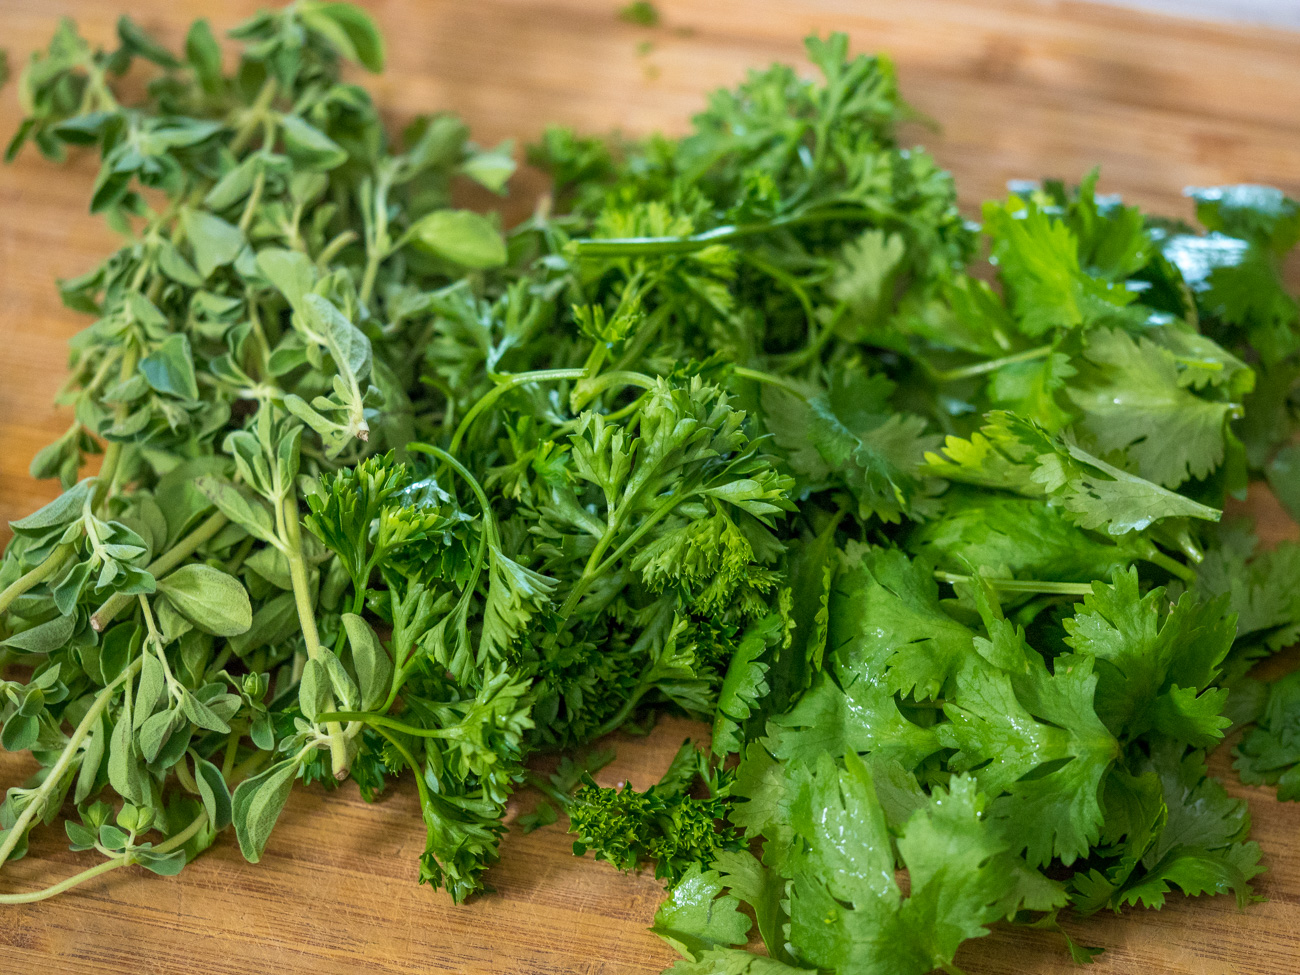 cilantro and parsley on a cutting board